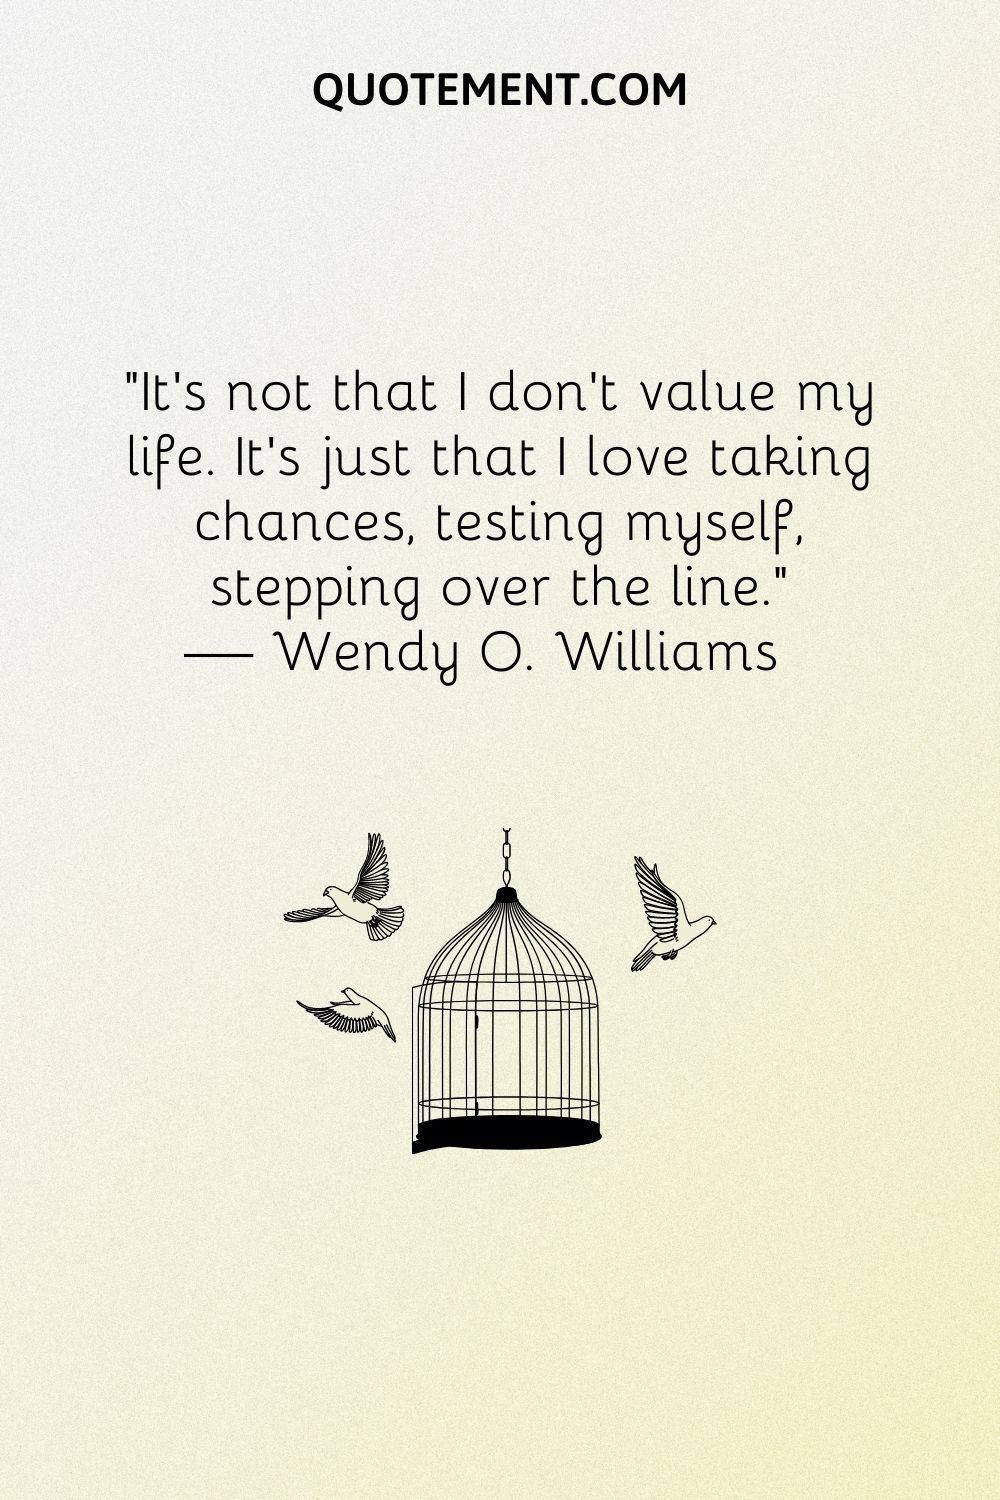 It's not that I don't value my life.